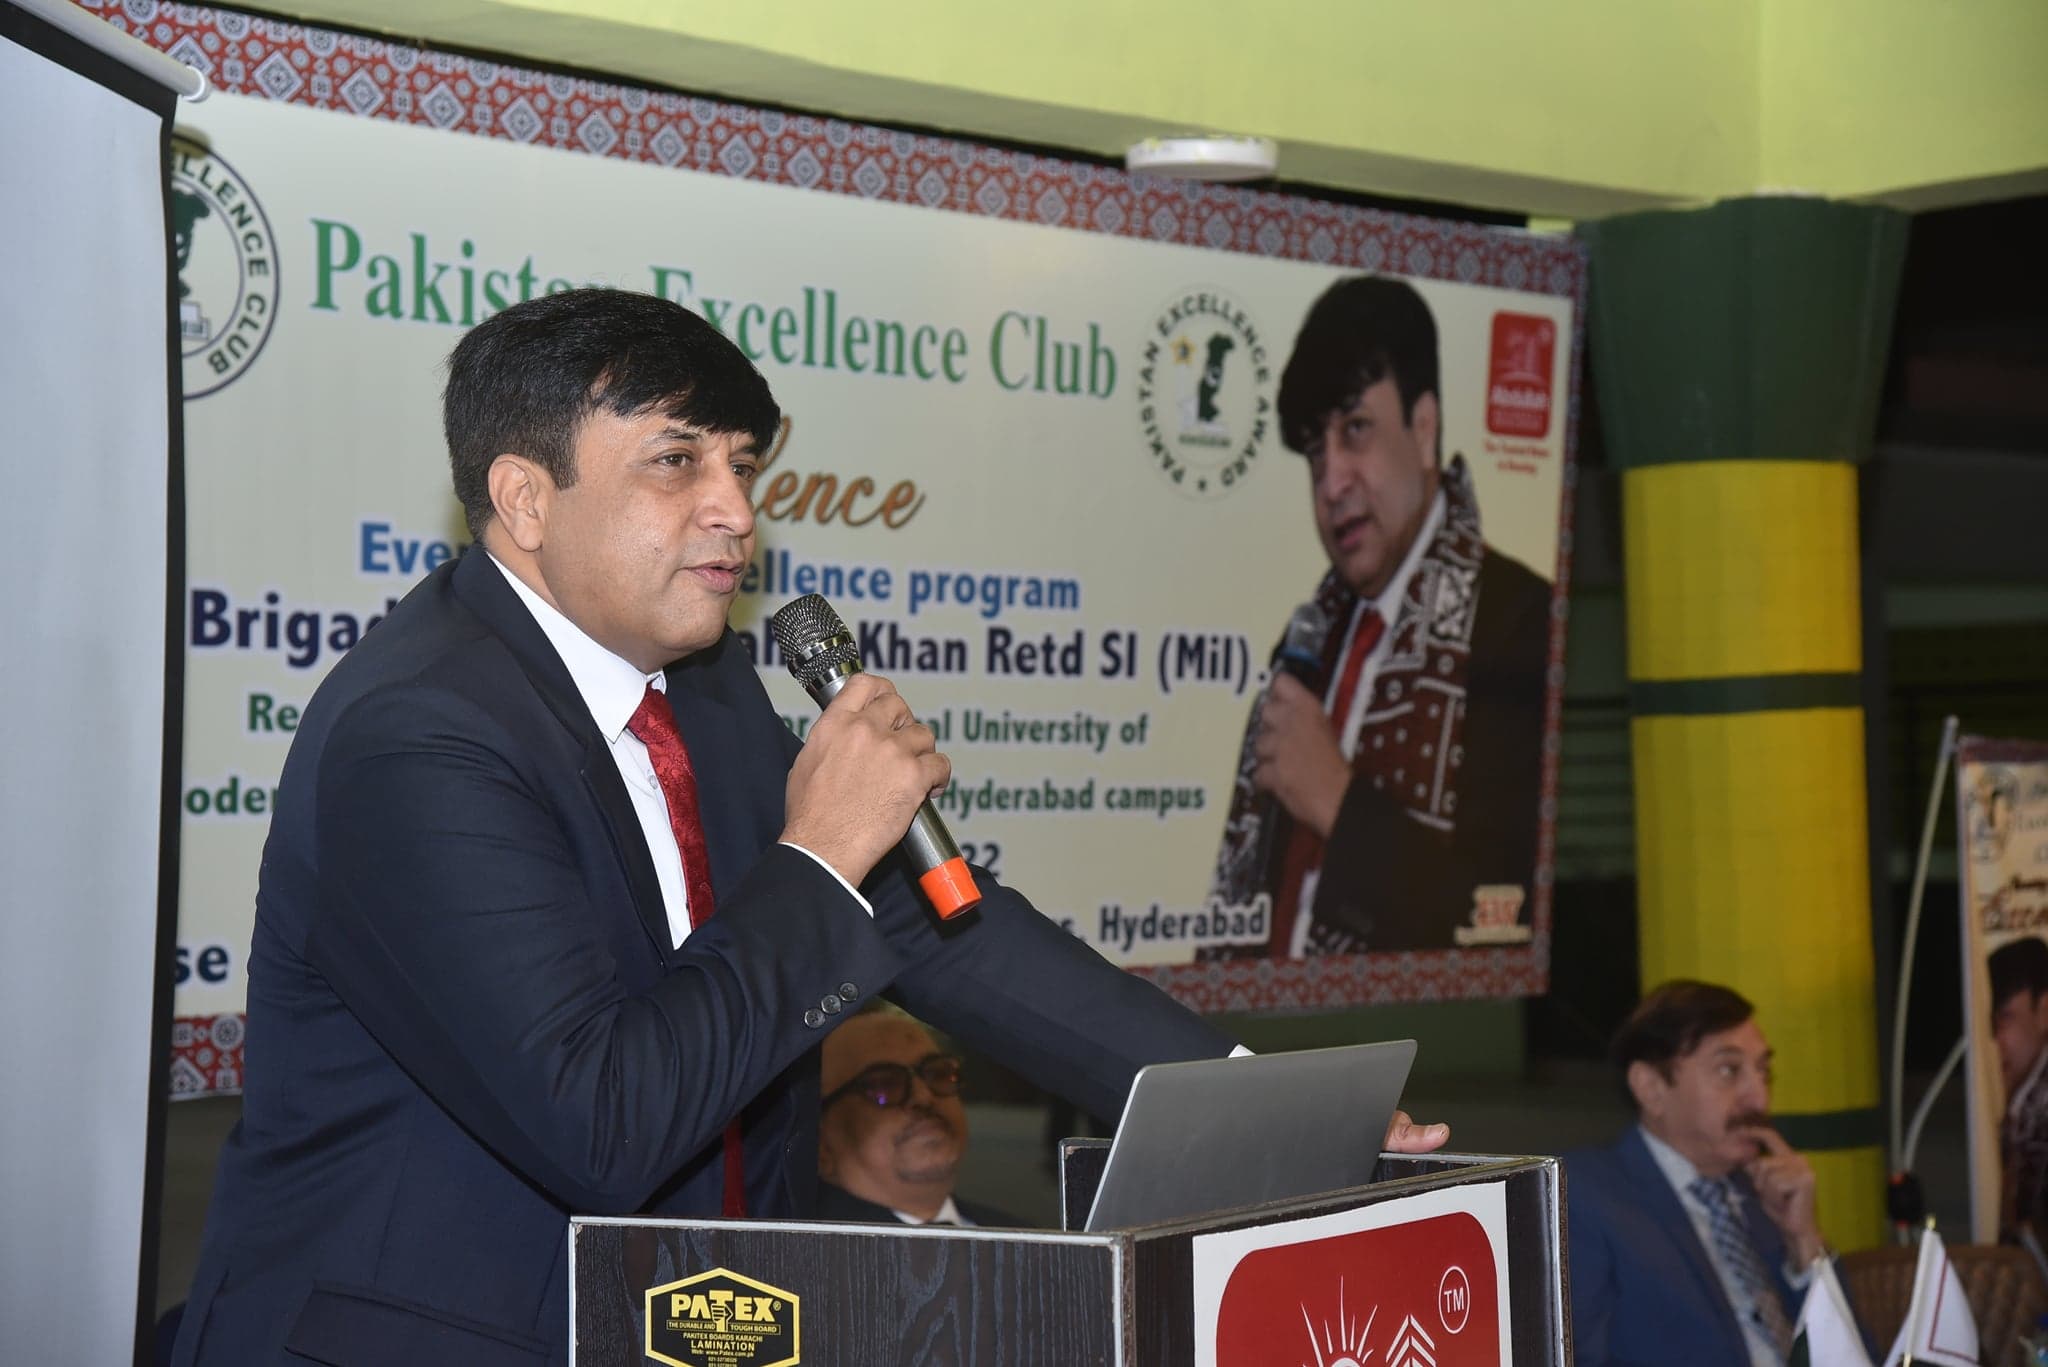 CEREMONY IN HONOR OF BRIGADIER (R) AAMIR ZAHID KHAN AT EXCELLENCE CLUB